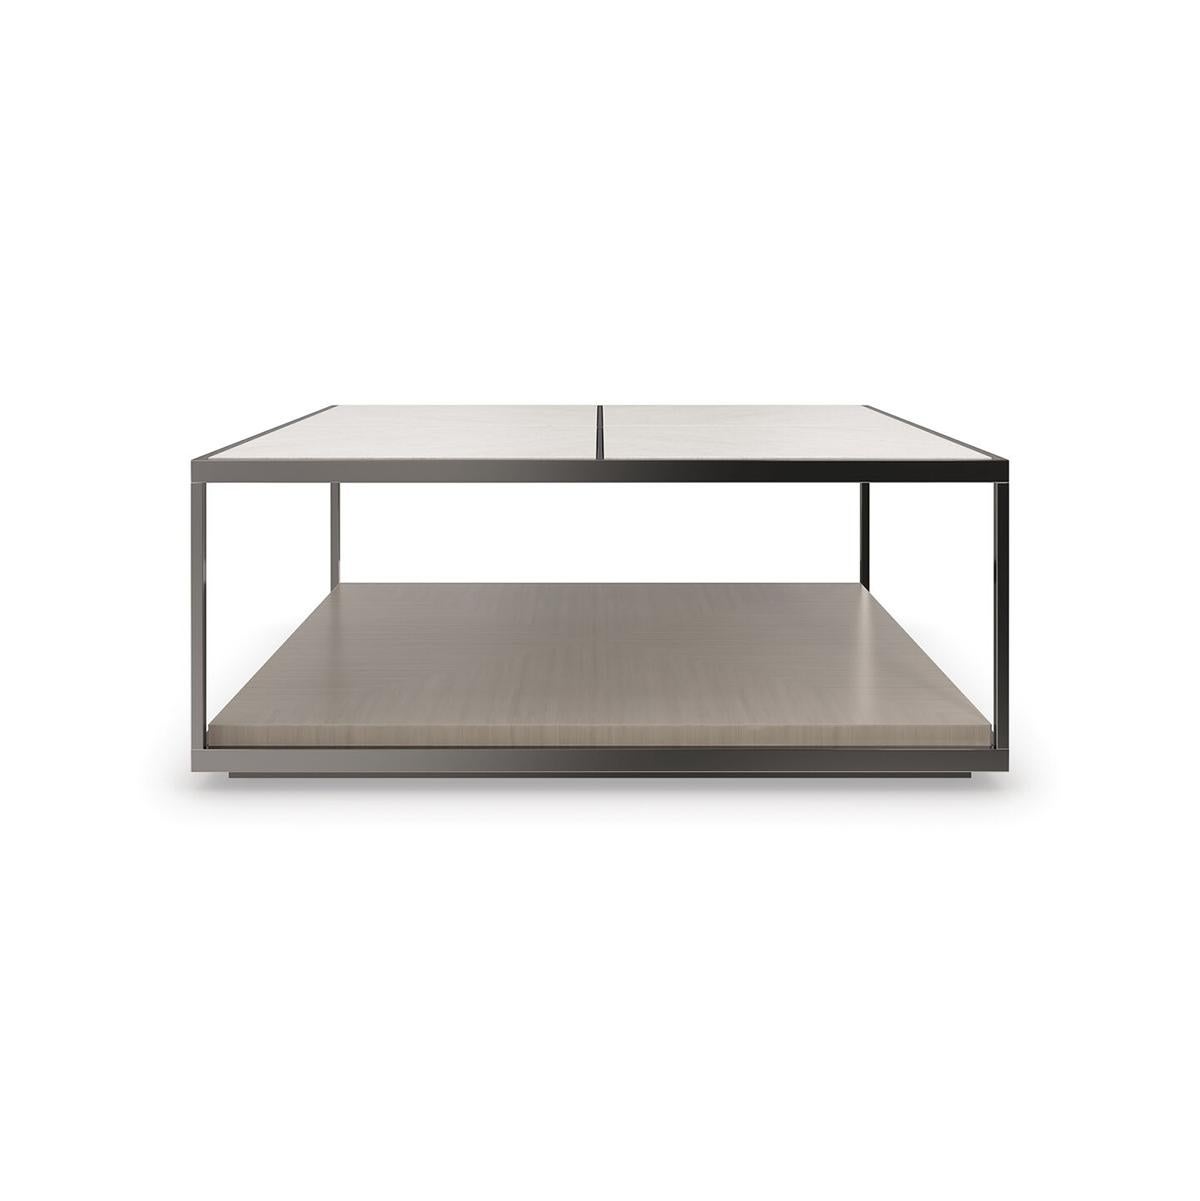 With a travertine stone top, deep bronze finished metal frame and a lower-tier shelf. Perfectly proportioned with a minimalist aesthetic, it seamlessly aligns the beauty of wood with metal and stone. Offers ample space for displaying art books and